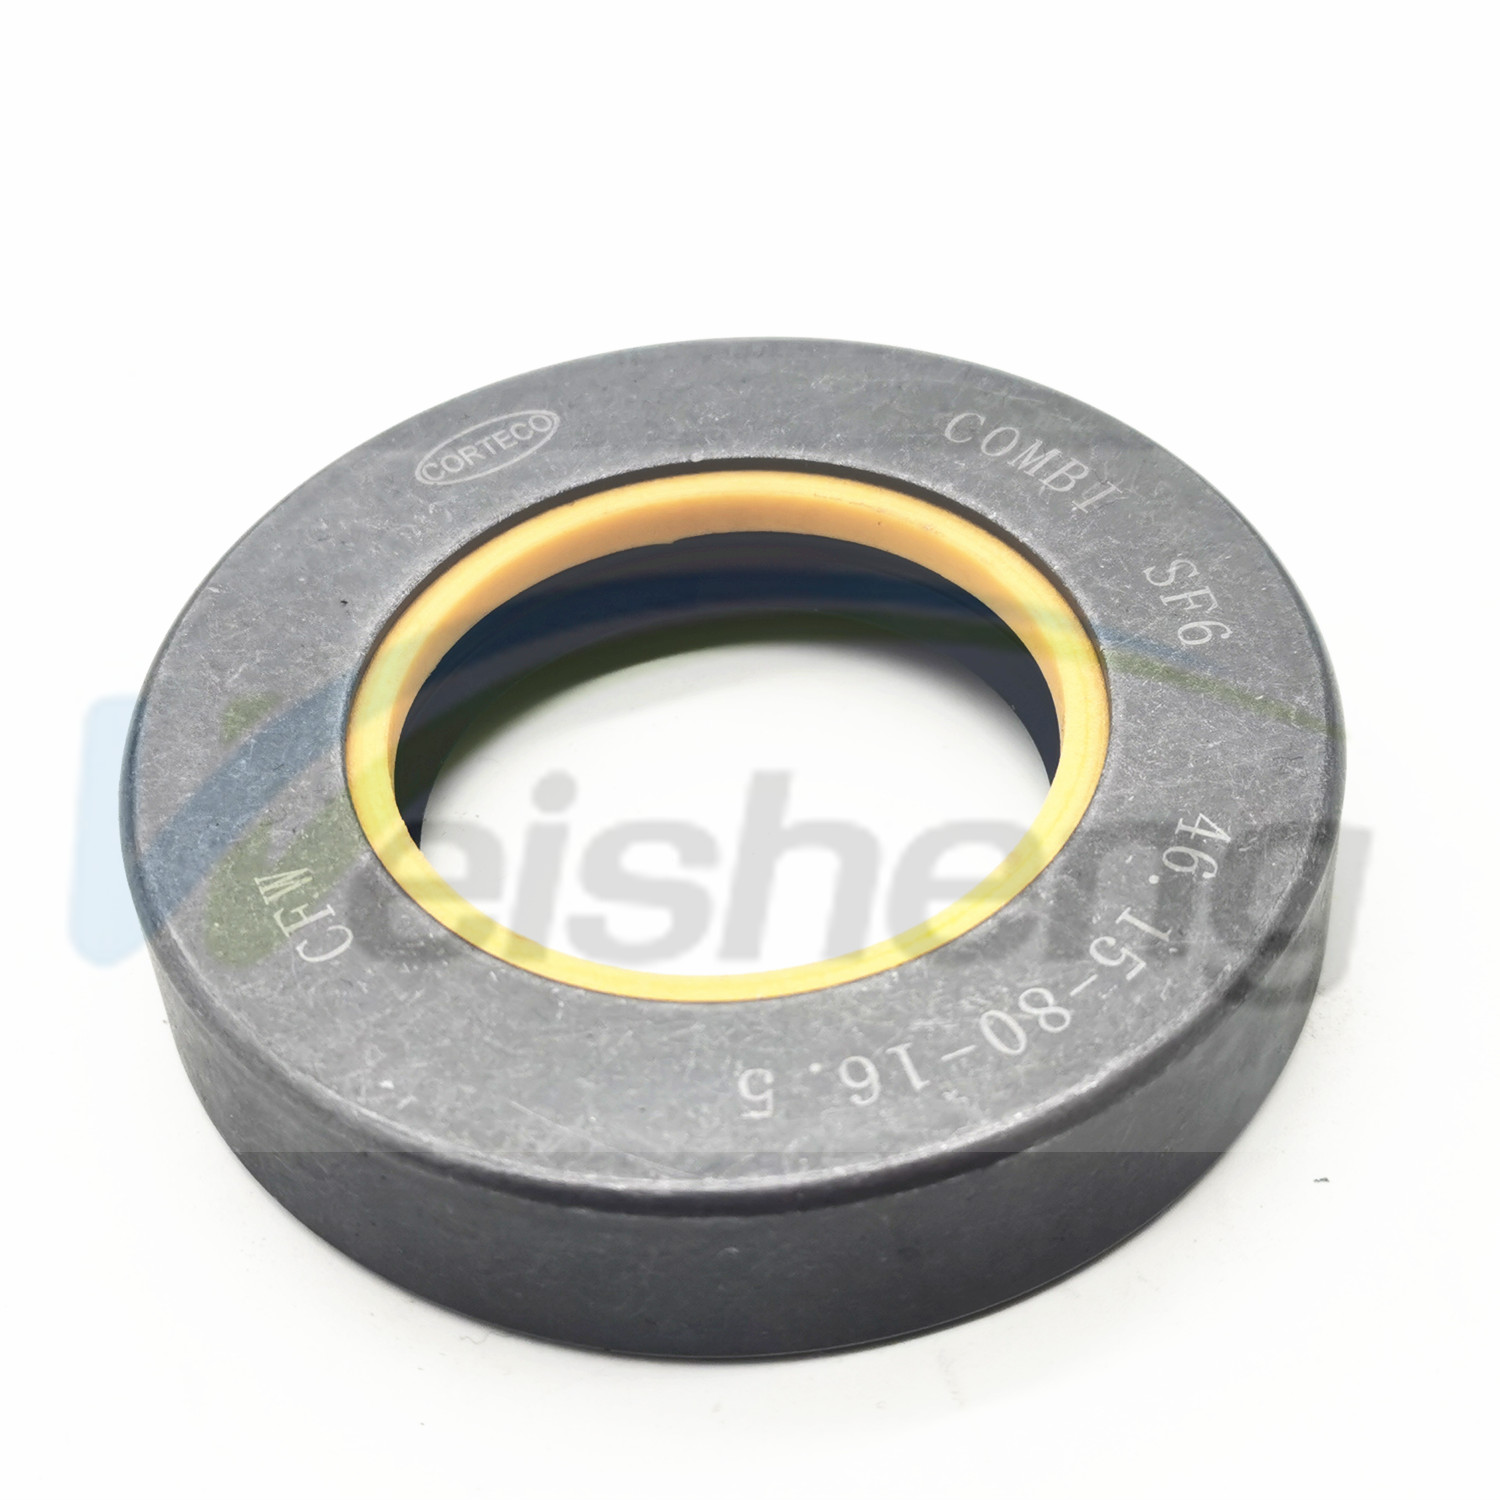 WS-SEALS COMBI SF6 SEAL 46.15*80*16.5 NBR+AU 12016669B Oil Seal for Tractor 